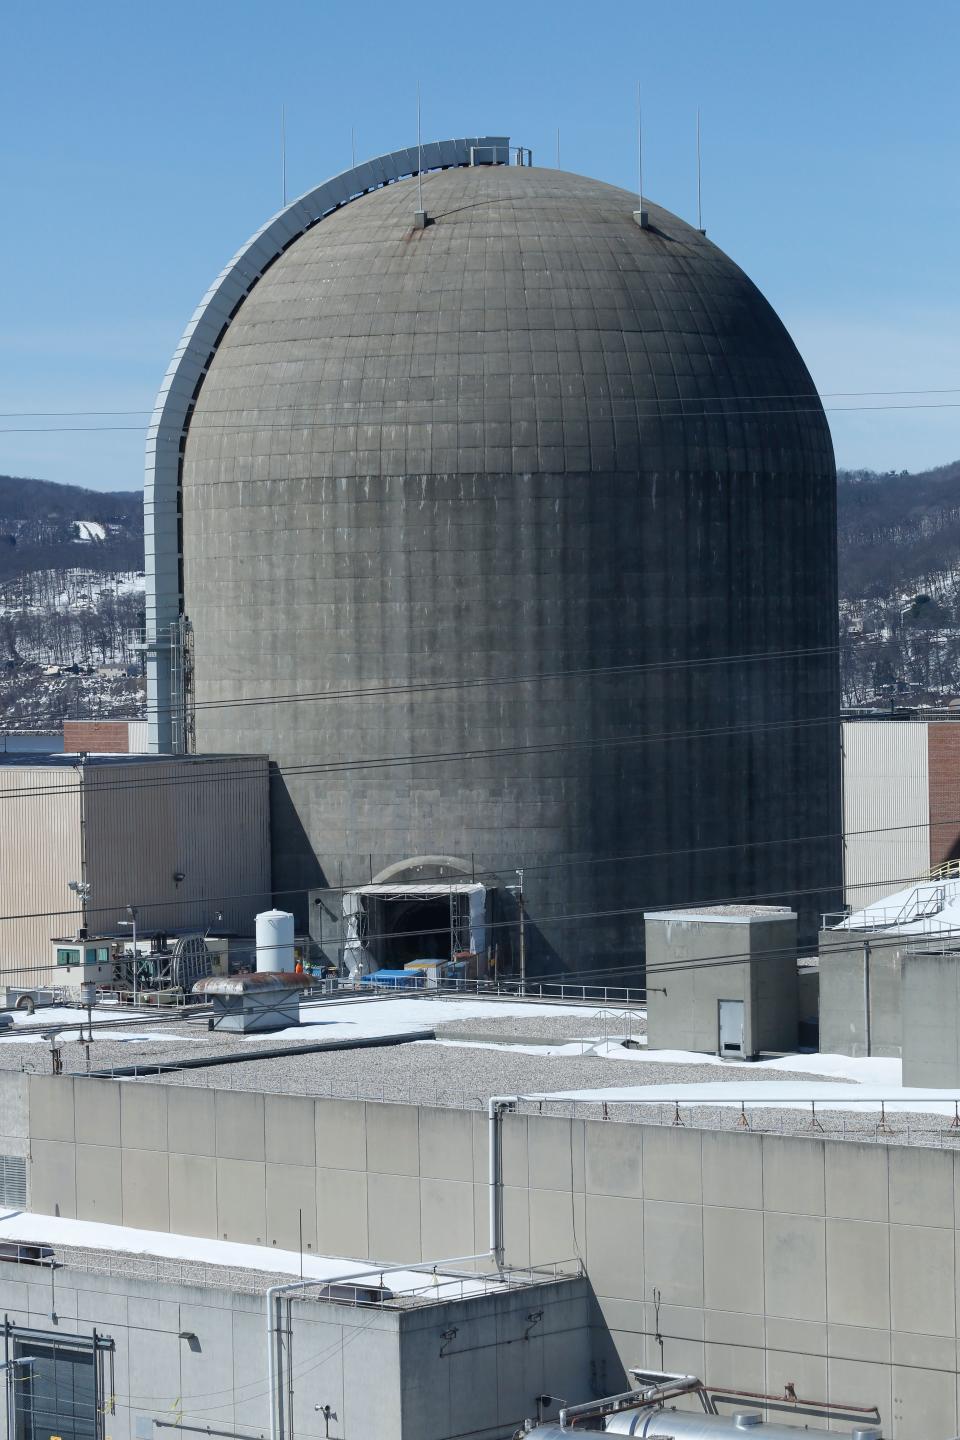 Work to replace the fuel rods at Indian Point 3 as well as the replacement, refurbishment and testing of equipment is underway as part of routine maintenance of the nuclear reactor in Buchanan on Mar. 20, 2017.